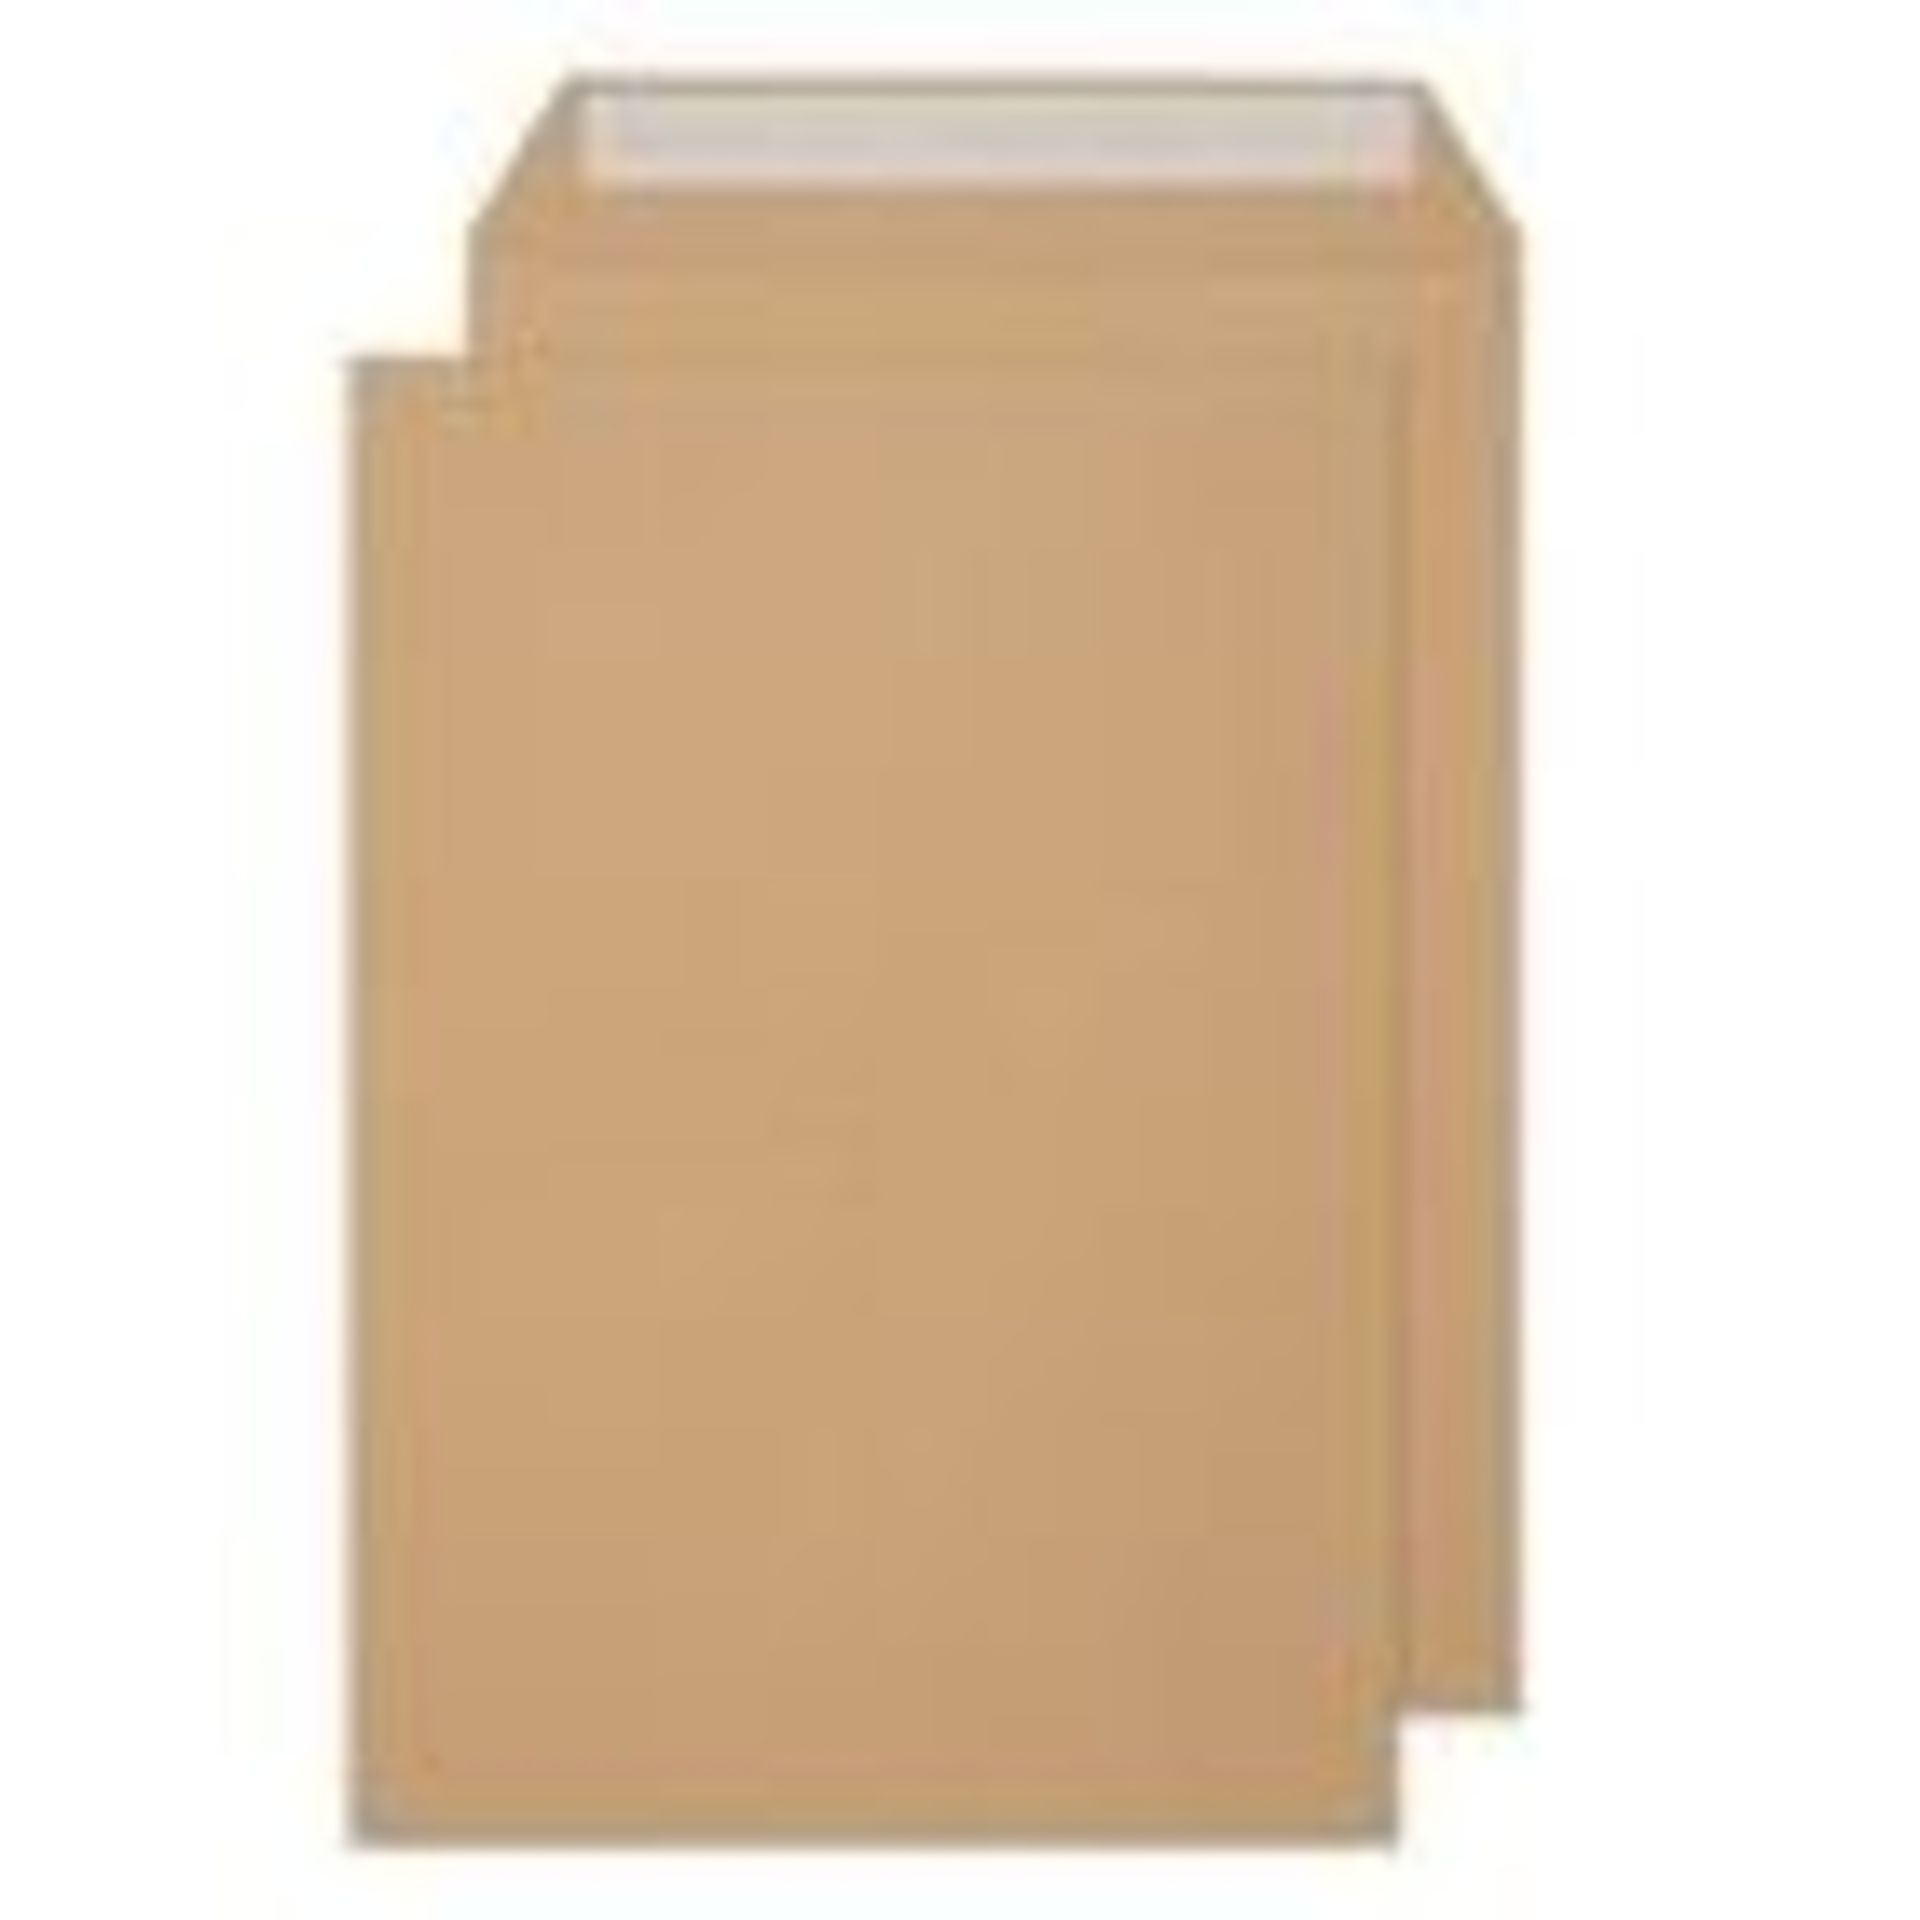 1 BOX OF 250 PEEL AND SEAL MANILLA ENVELOPES / PN 219 / RRP £14.99 (VIEWING HIGHLY RECOMMENDED)